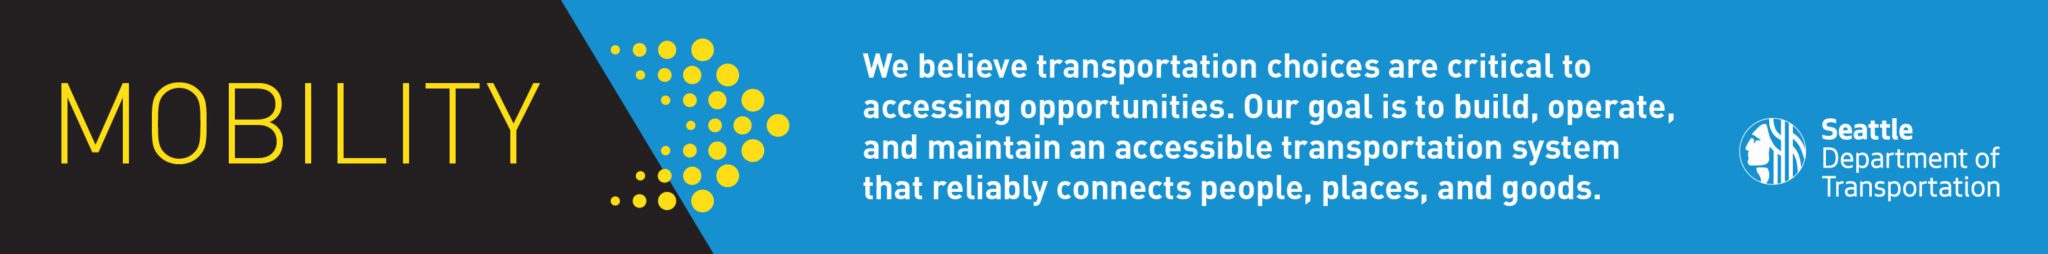 Graphic highlighting mobility as one of SDOT's core values and goals. The word mobility is in large font, with a small infographic of a forward arrow.